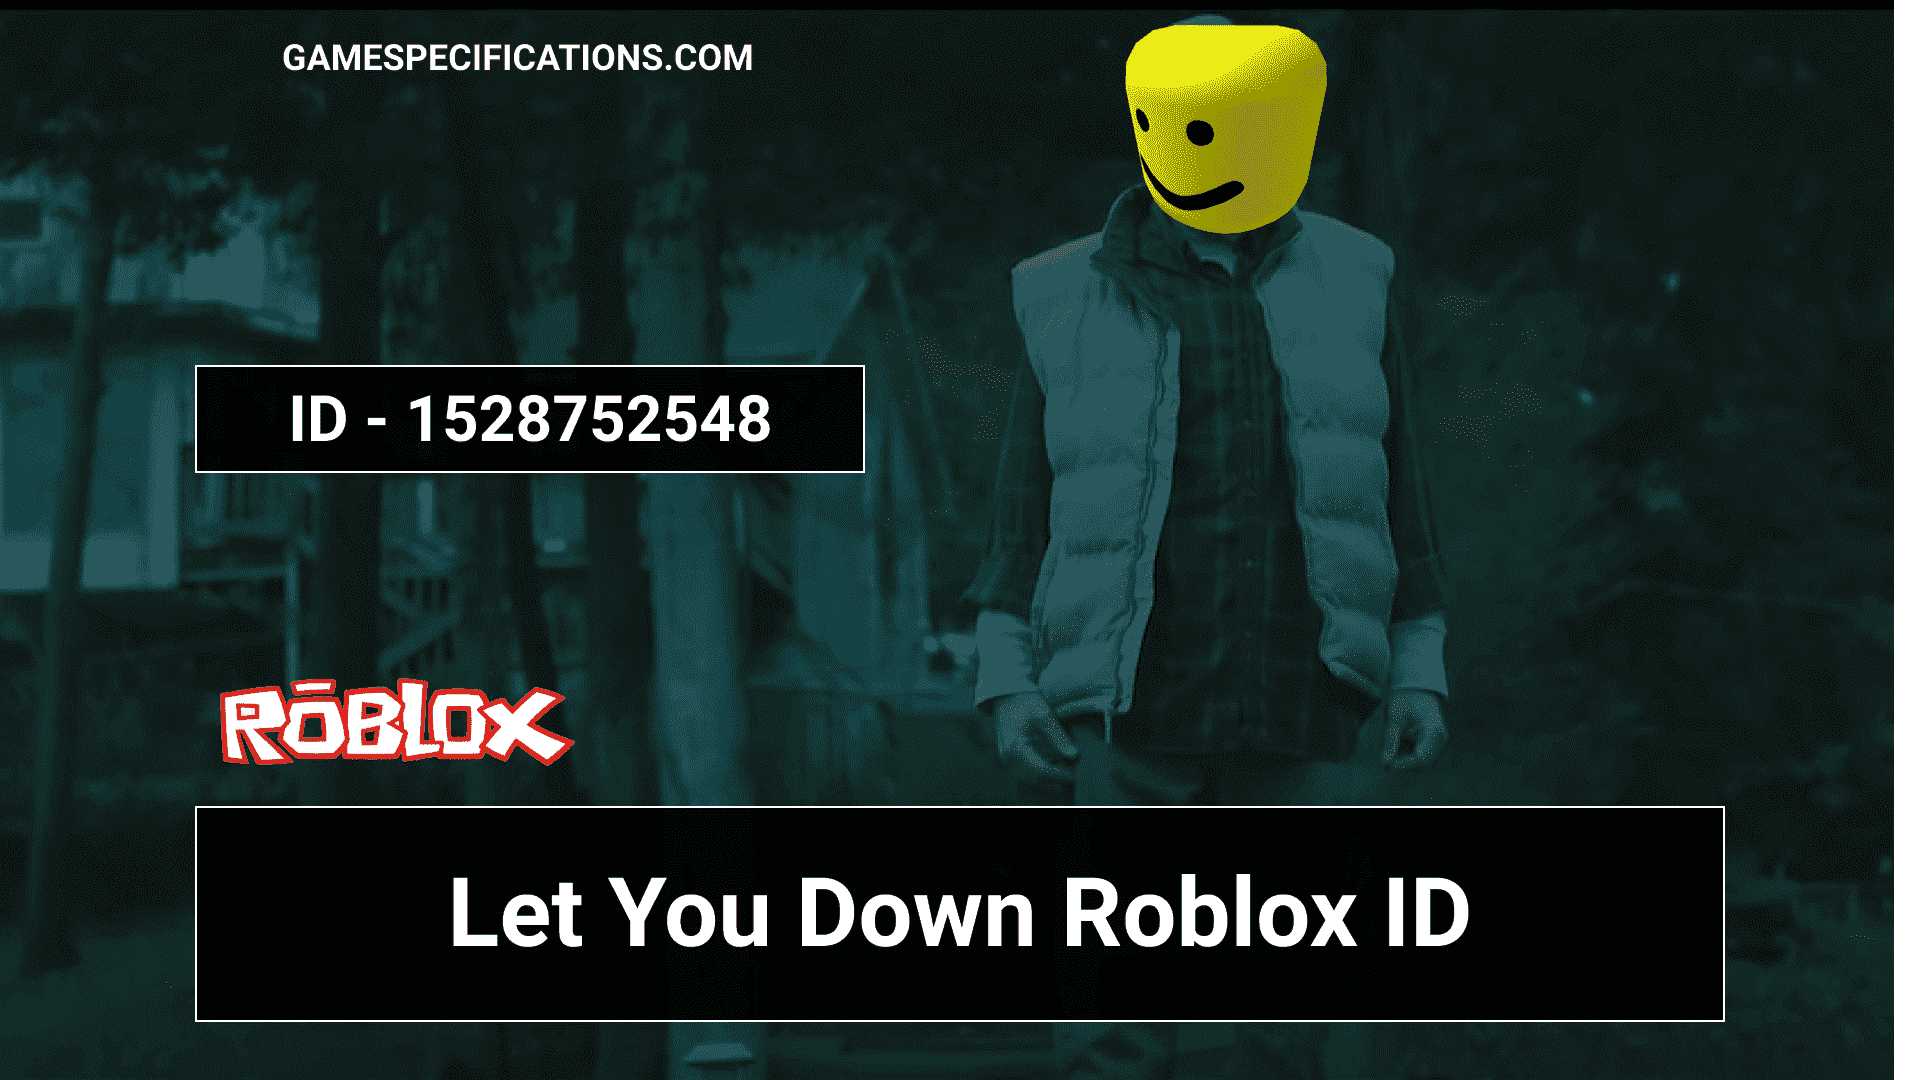 Let You Down Roblox Id Codes To Play The Nf Music 2021 Game Specifications - roblox music code all my friends are dead